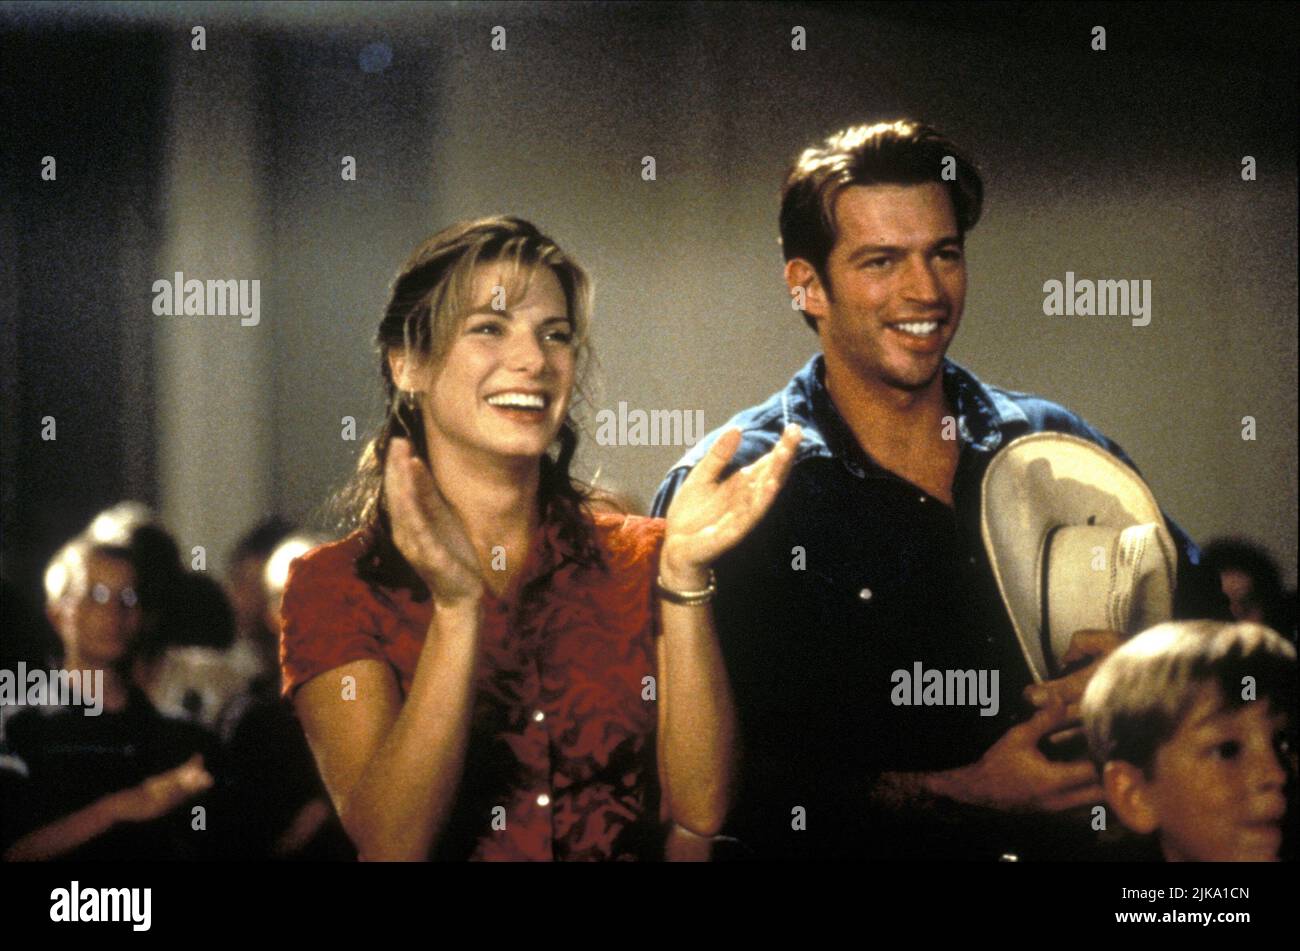 https://c8.alamy.com/comp/2JKA1CN/sandra-bullock-harry-connick-jr-film-hope-floats-1998-characters-birdee-pruitt-justin-matisse-director-forest-whitaker-29-may-1998-warning-this-photograph-is-for-editorial-use-only-and-is-the-copyright-of-20-century-fox-andor-the-photographer-assigned-by-the-film-or-production-company-and-can-only-be-reproduced-by-publications-in-conjunction-with-the-promotion-of-the-above-film-a-mandatory-credit-to-20-century-fox-is-required-the-photographer-should-also-be-credited-when-known-no-commercial-use-can-be-granted-without-written-authority-from-the-film-company-2JKA1CN.jpg